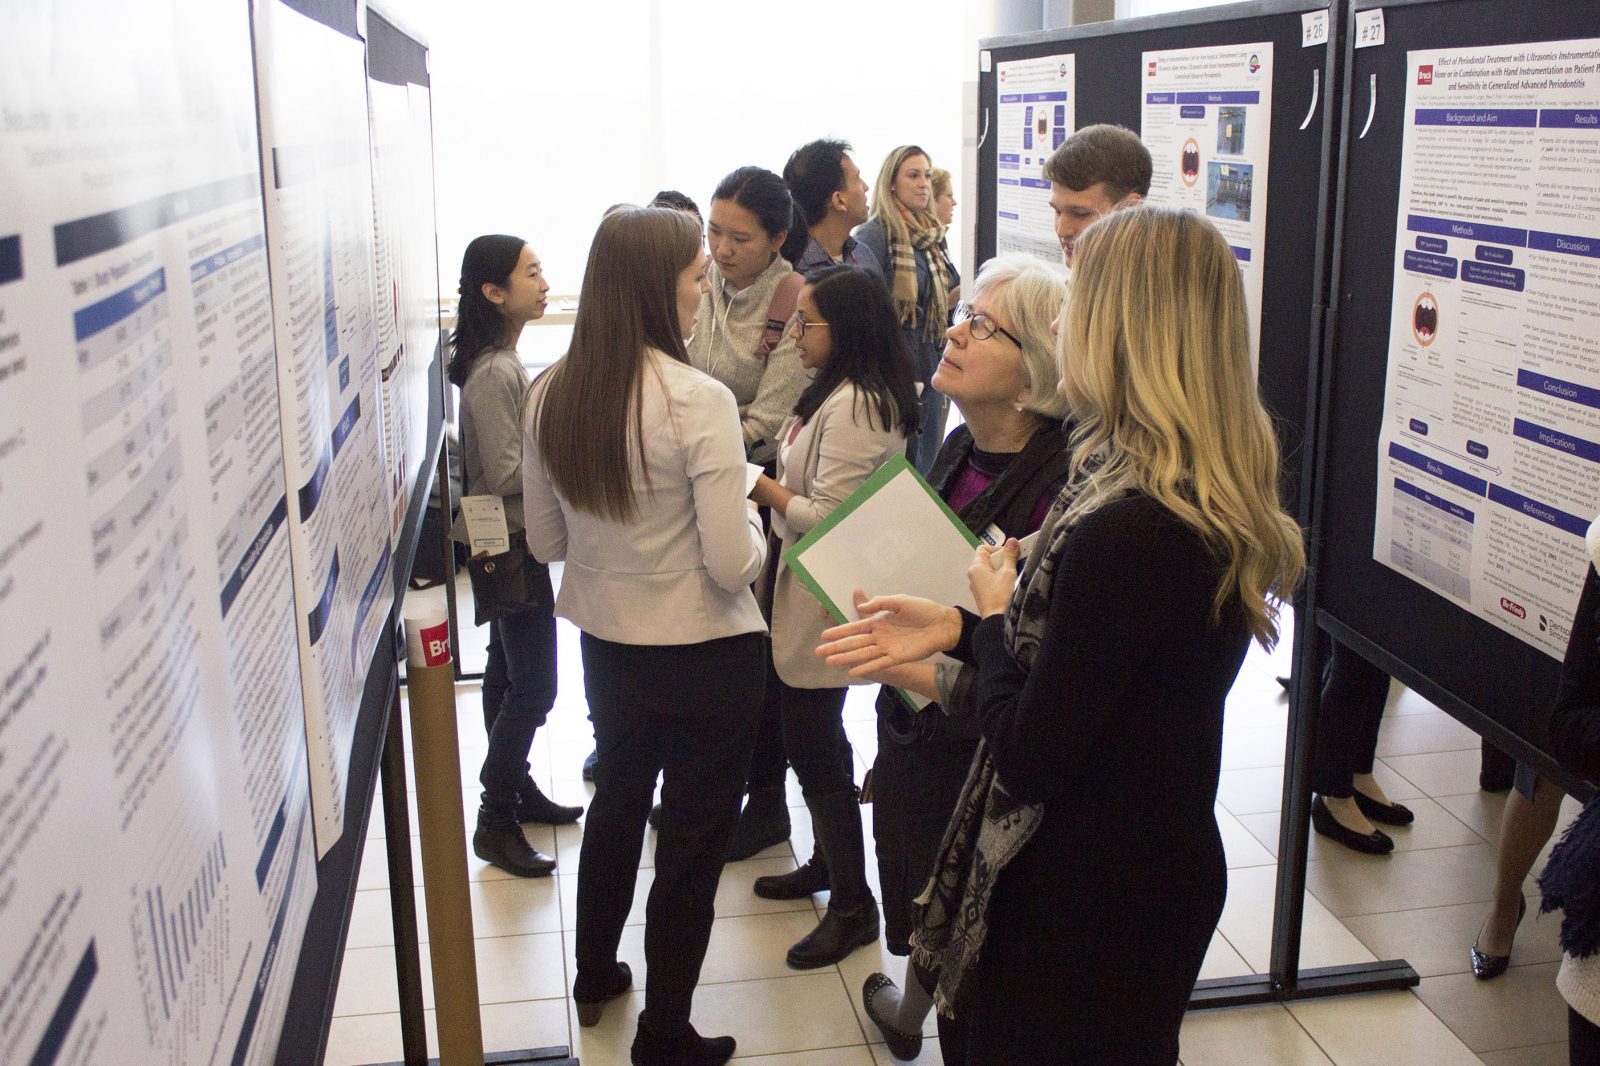 Nearly a dozen people gather to look at several poster presentations focused on health research by Brock University students.